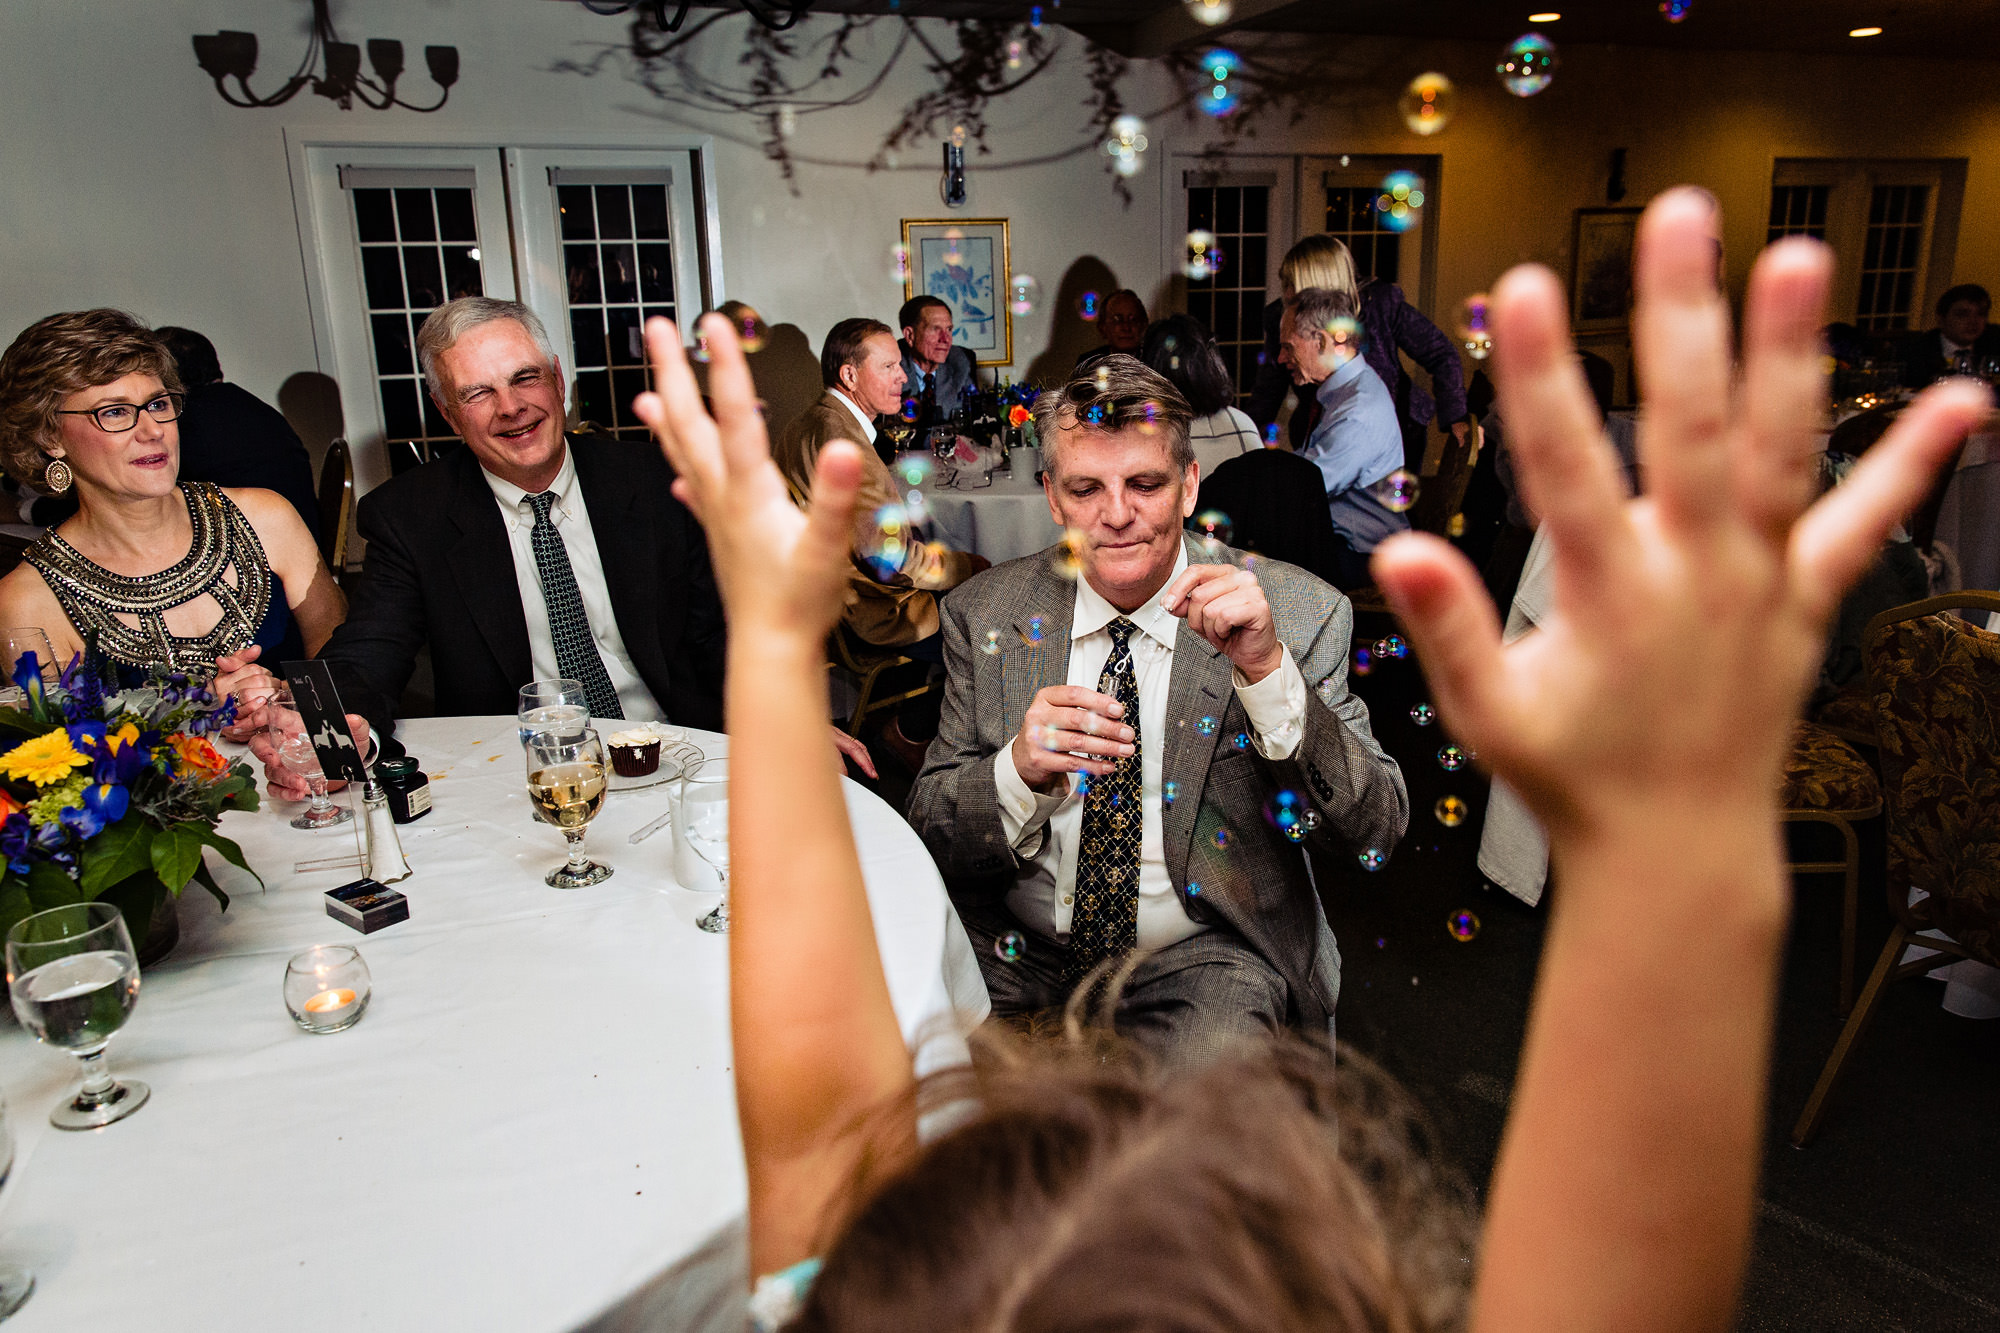 Guests blow bubbles at a Freeport Maine wedding reception